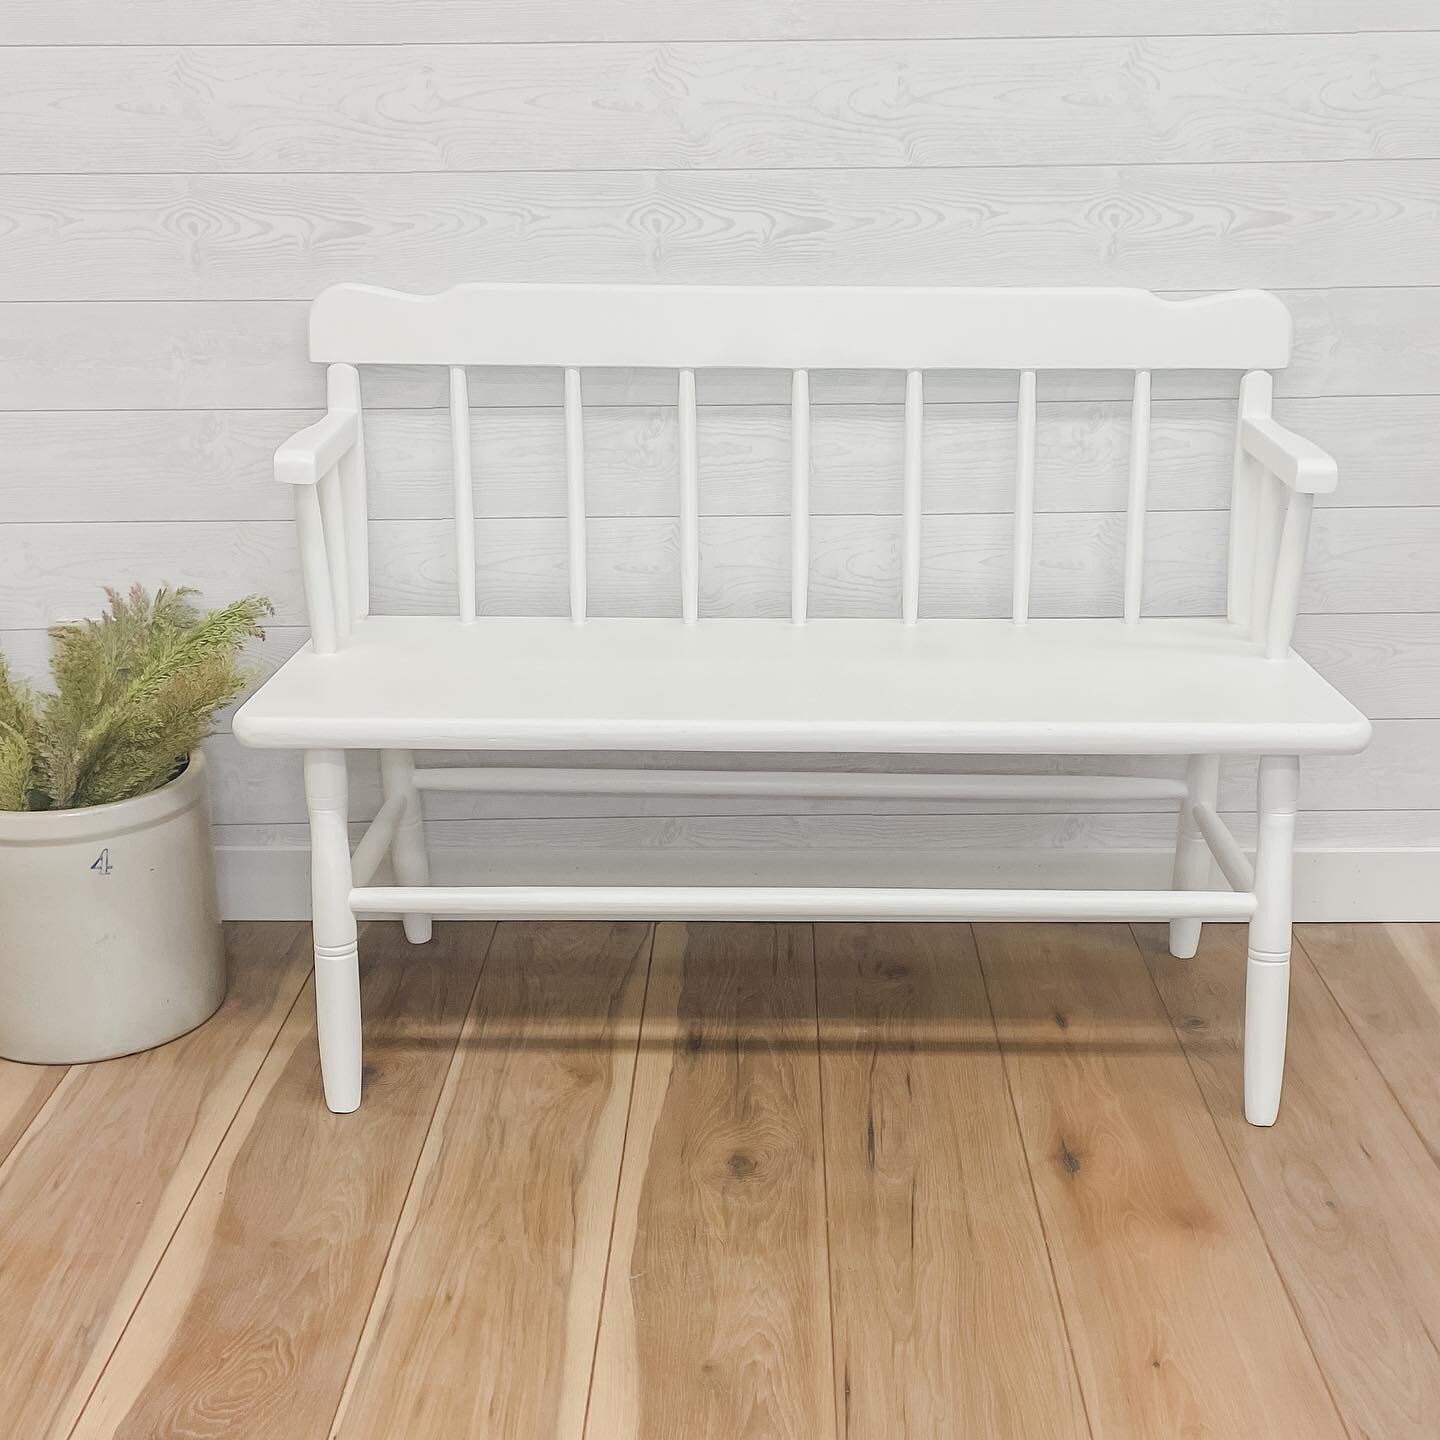 A quiant porch bench that was our customer&rsquo;s grandfathers-it had MANY bubbles in the paint from layers and years of different paint colors. She wanted those bubbles gone and a simple white finish. I think we delivered ✔️

#modernfarmhouse #farm